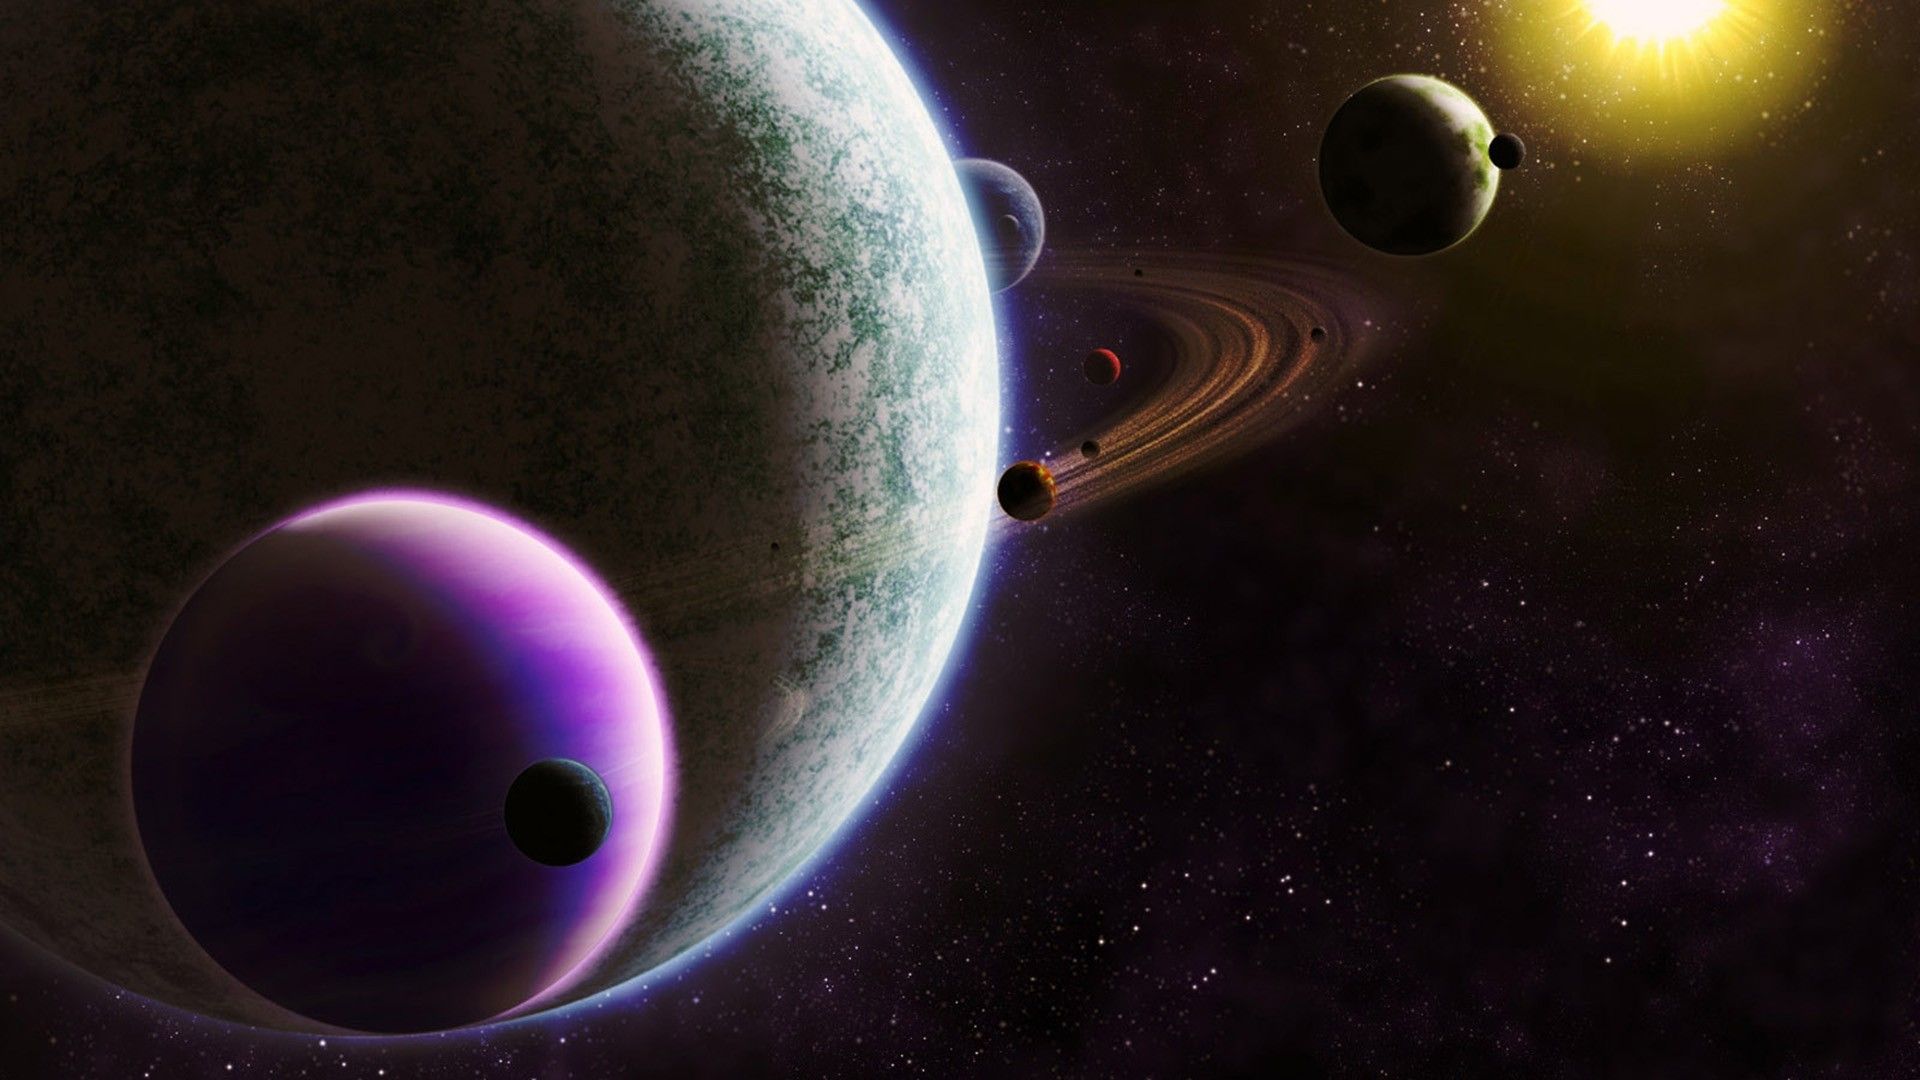 Solar System Hd Wallpaper - Pics about space